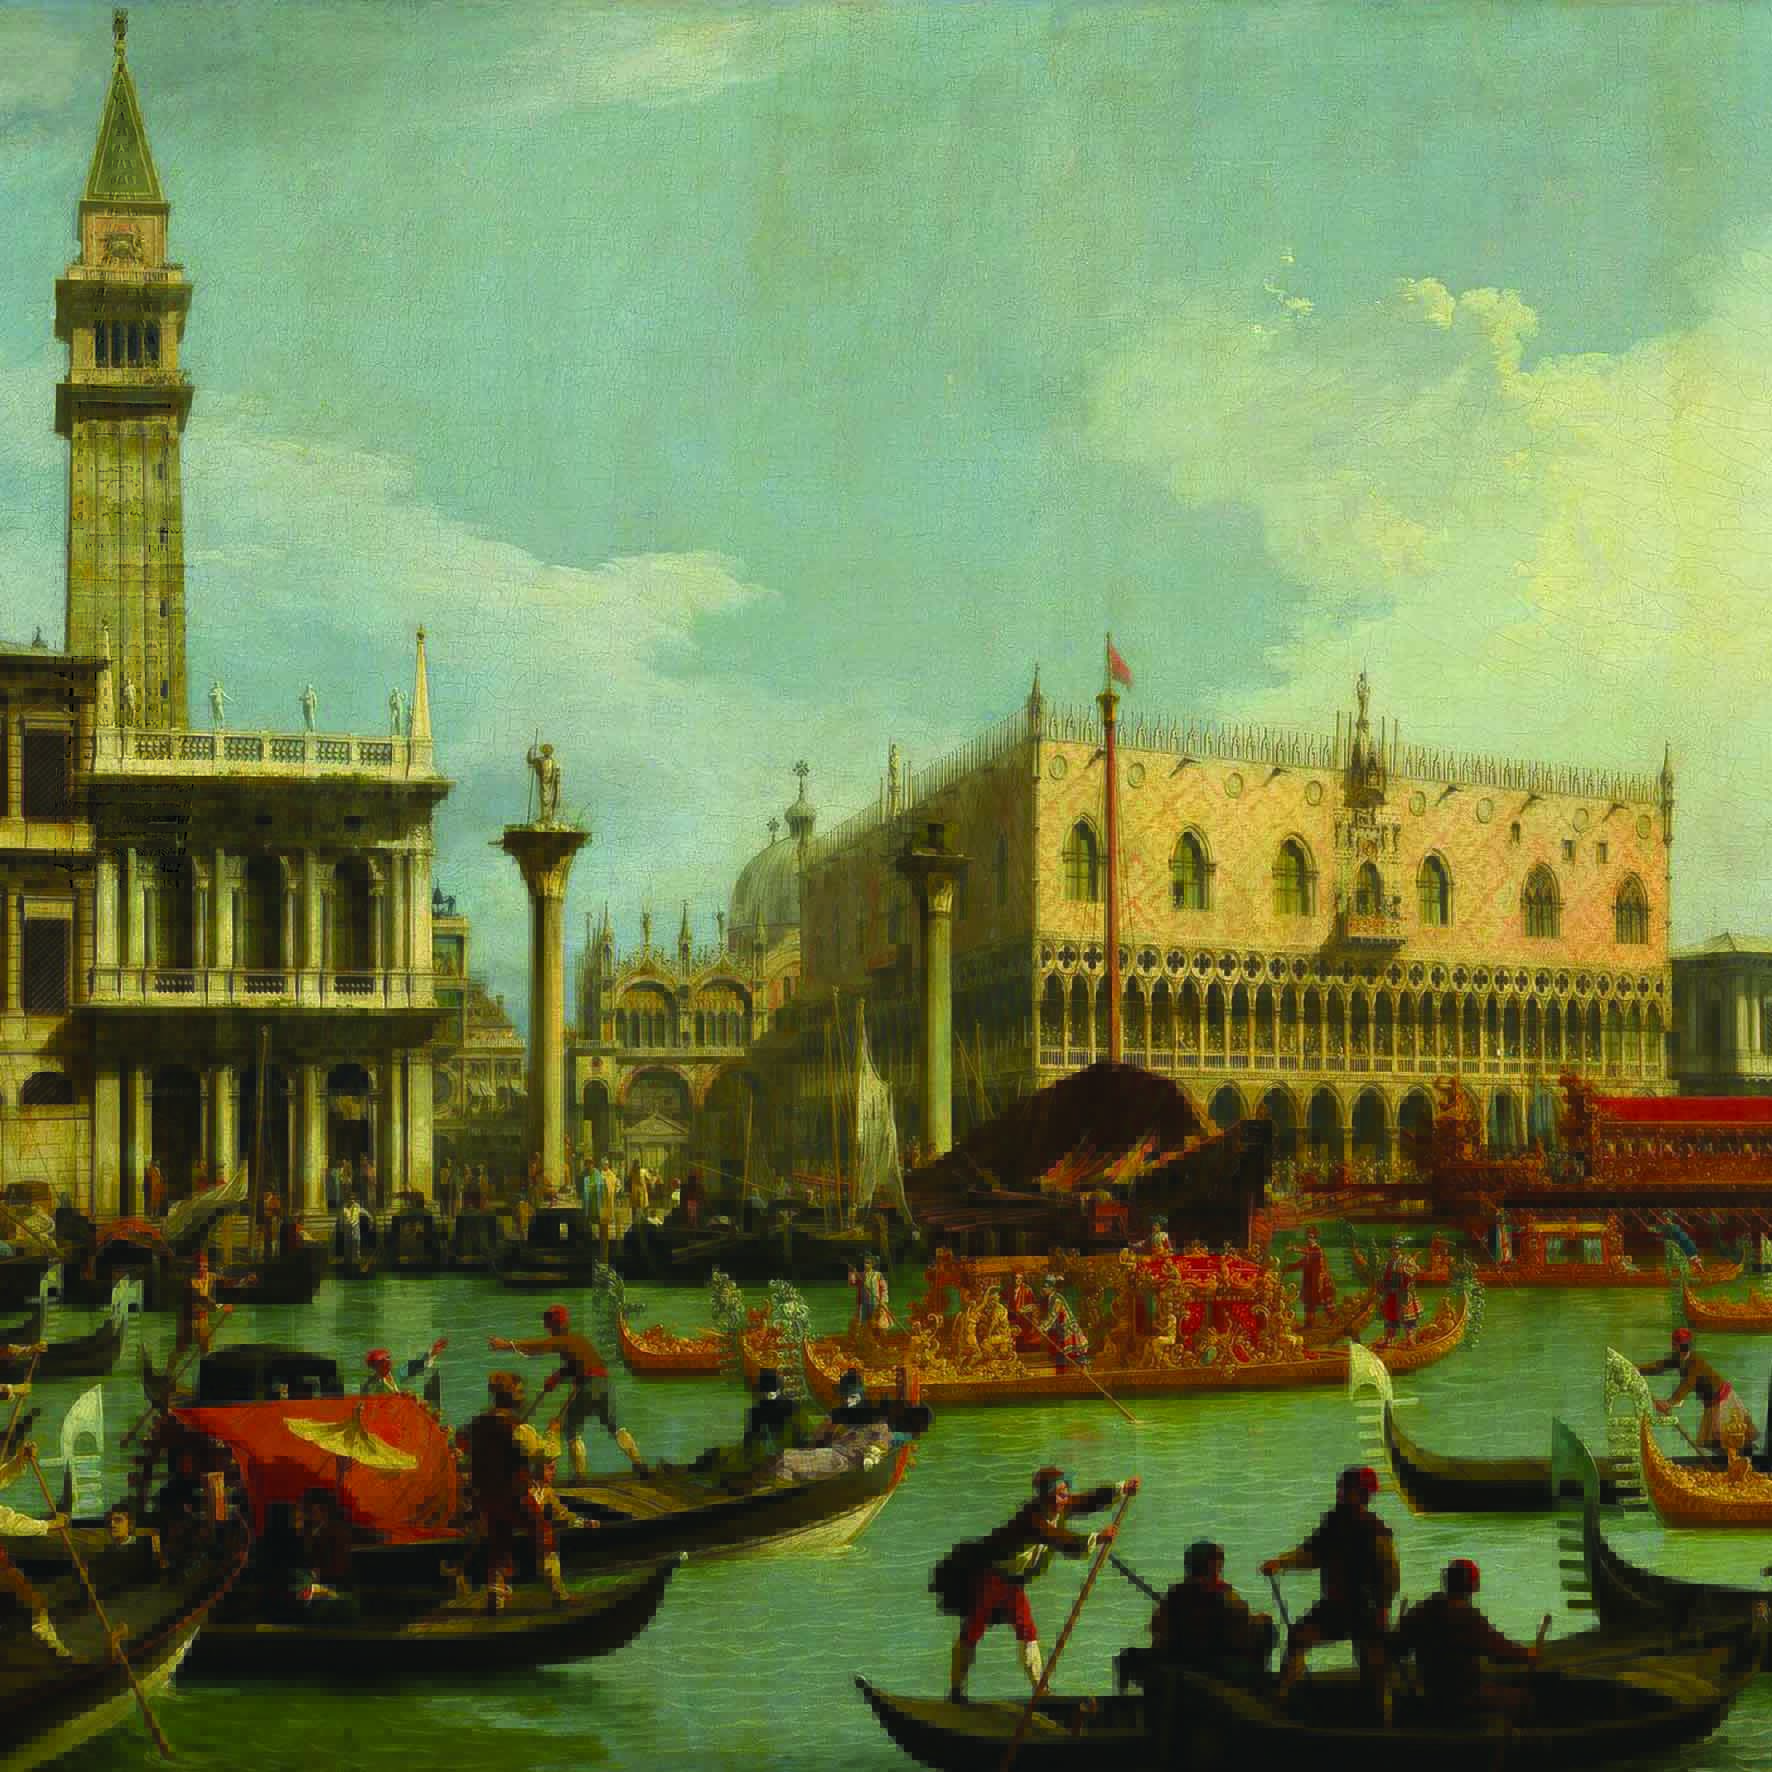 GLORY OF LIGHT AND COLOUR. FROM TIEPOLO TO CANALETTO AND GUARDI